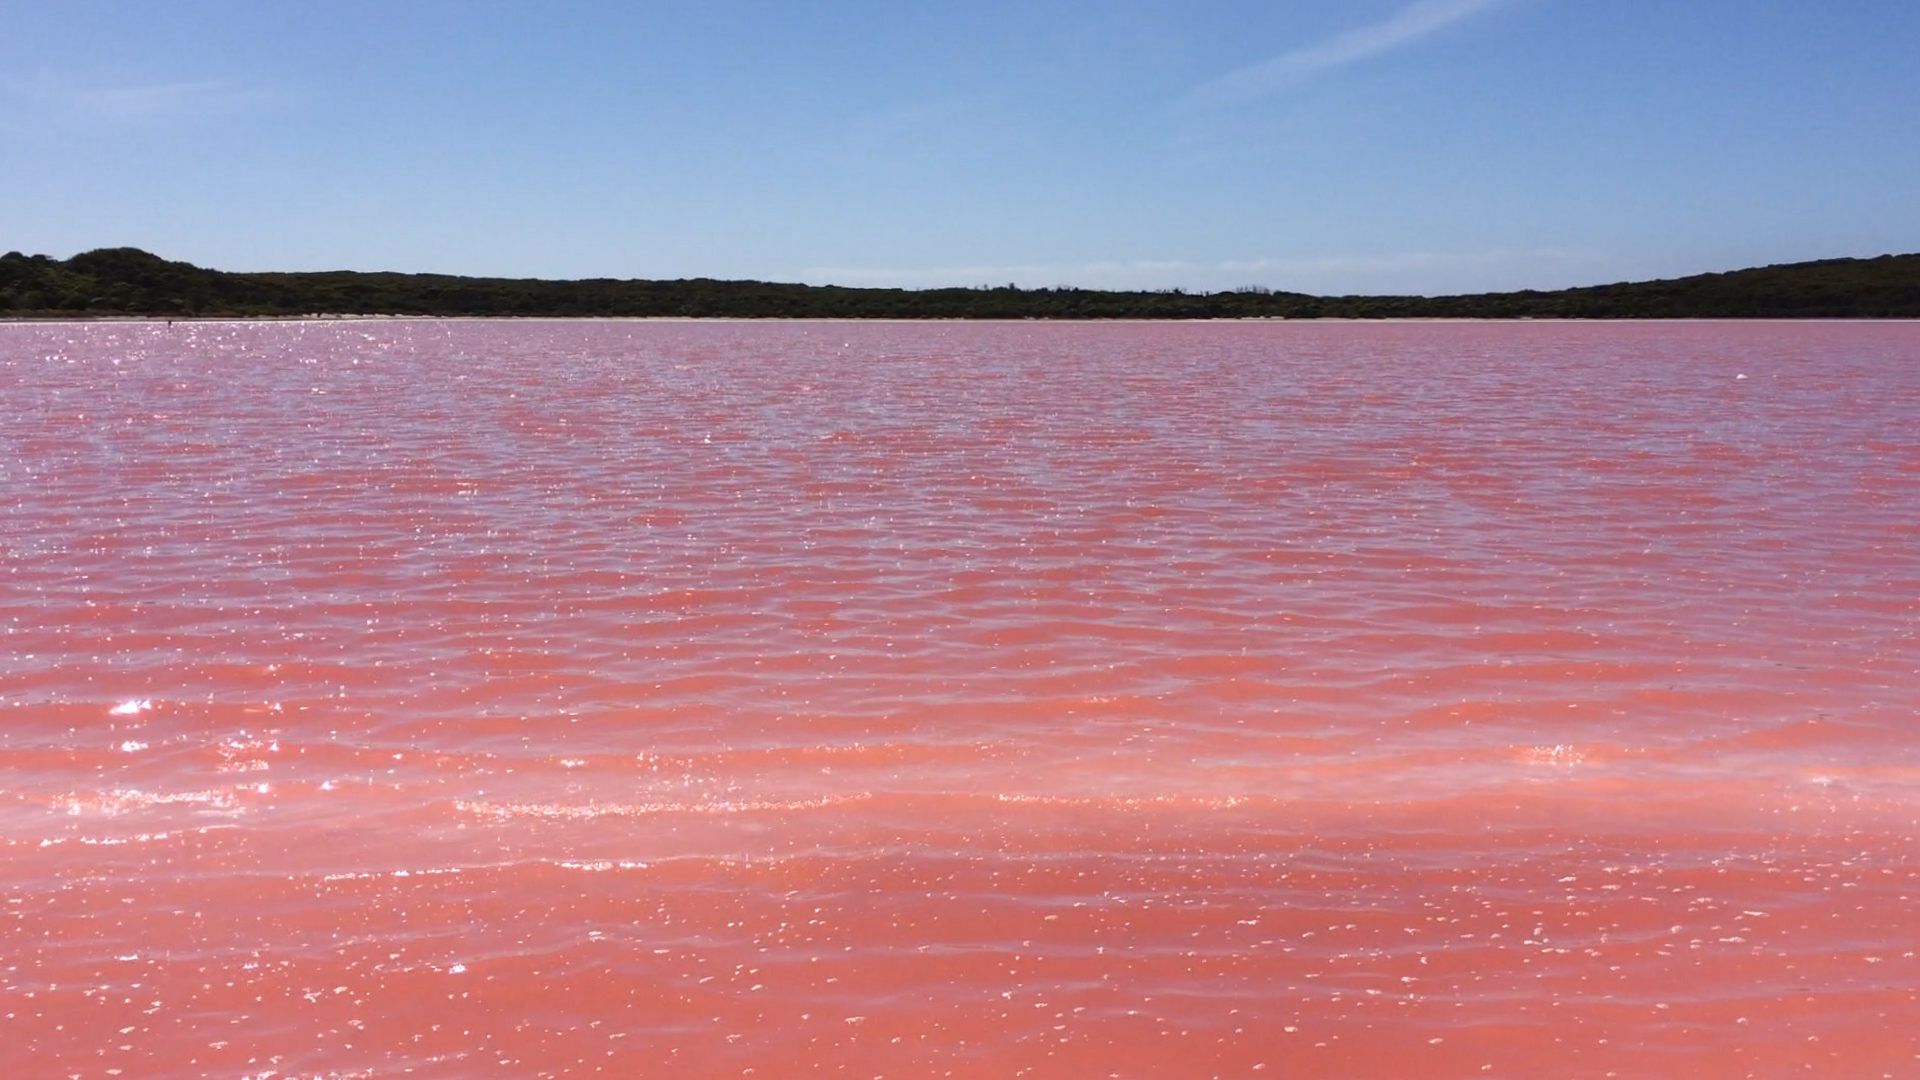 Why Is This Lake in Australia Bright Pink?